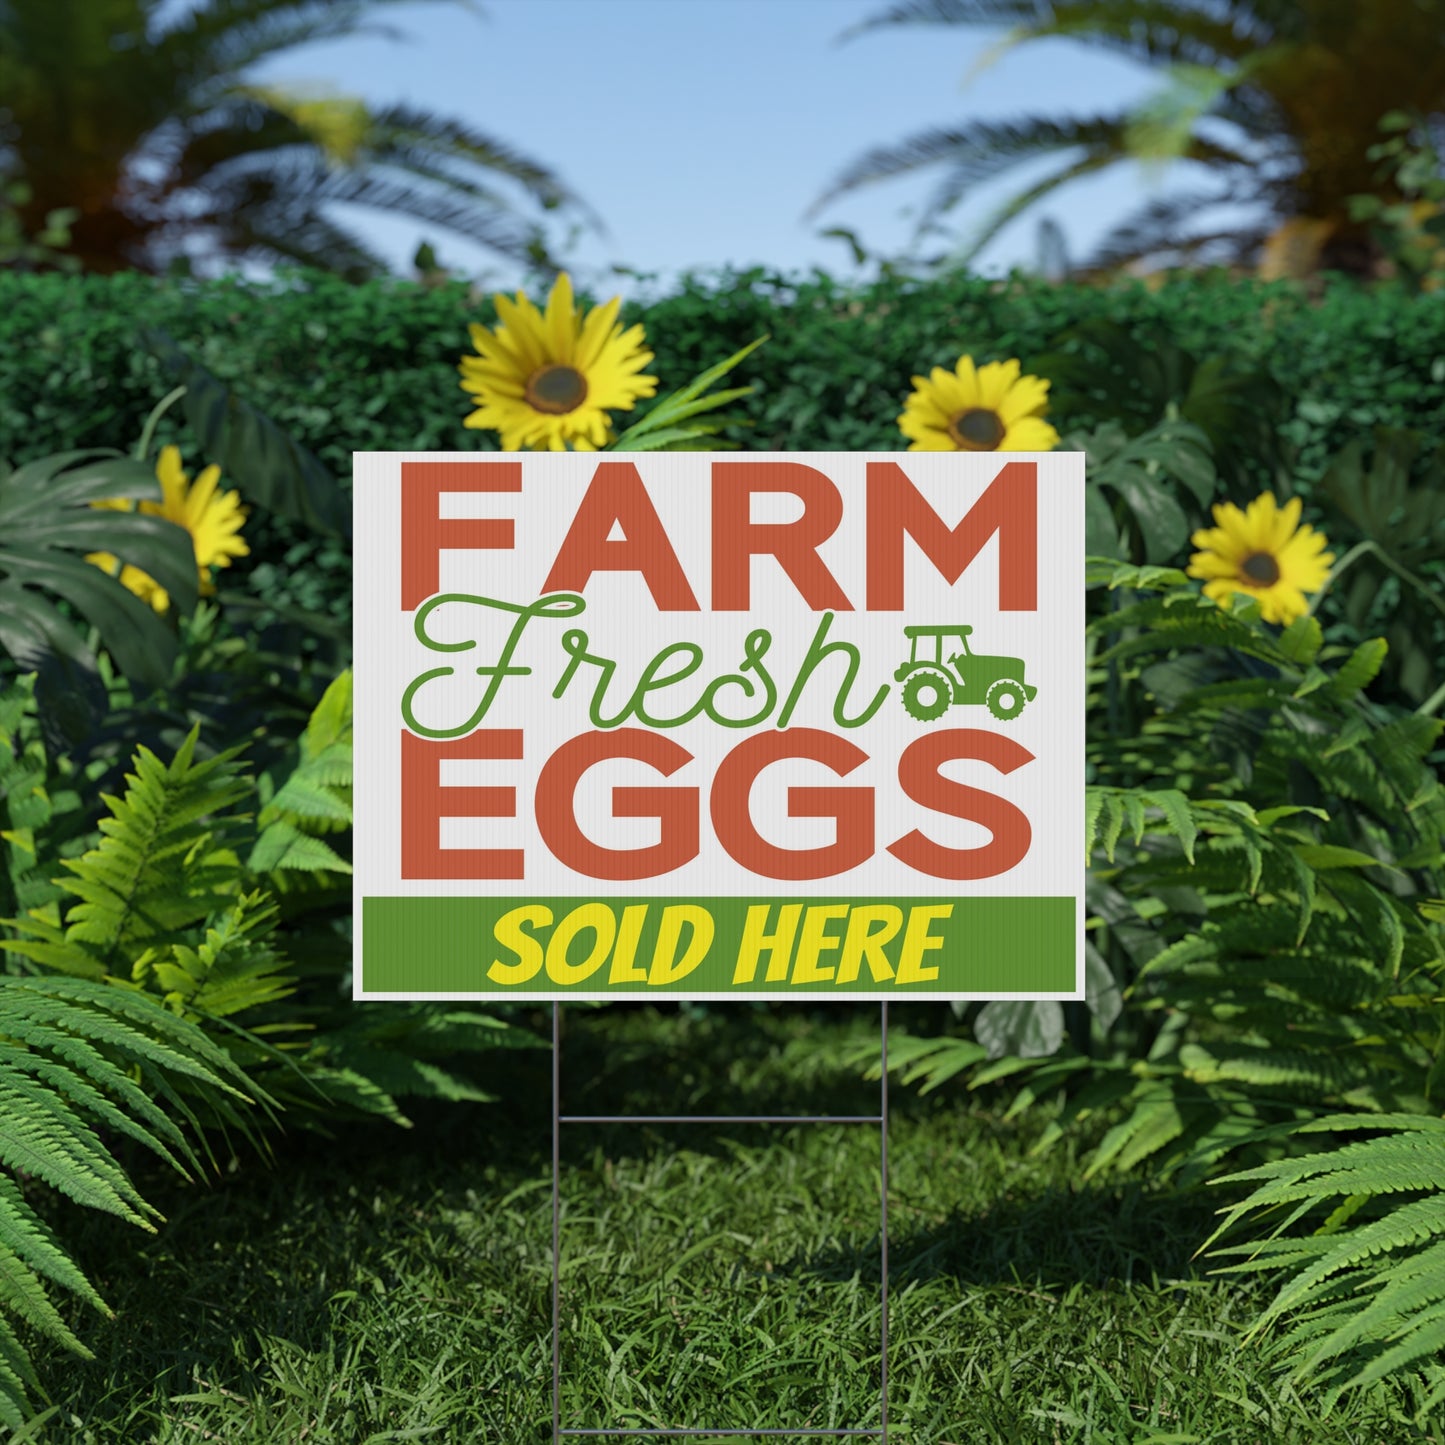 Farm Fresh Eggs Sold Here Yard Sign, 18x12, 24x18, 36x24, H-Stake Included, v4